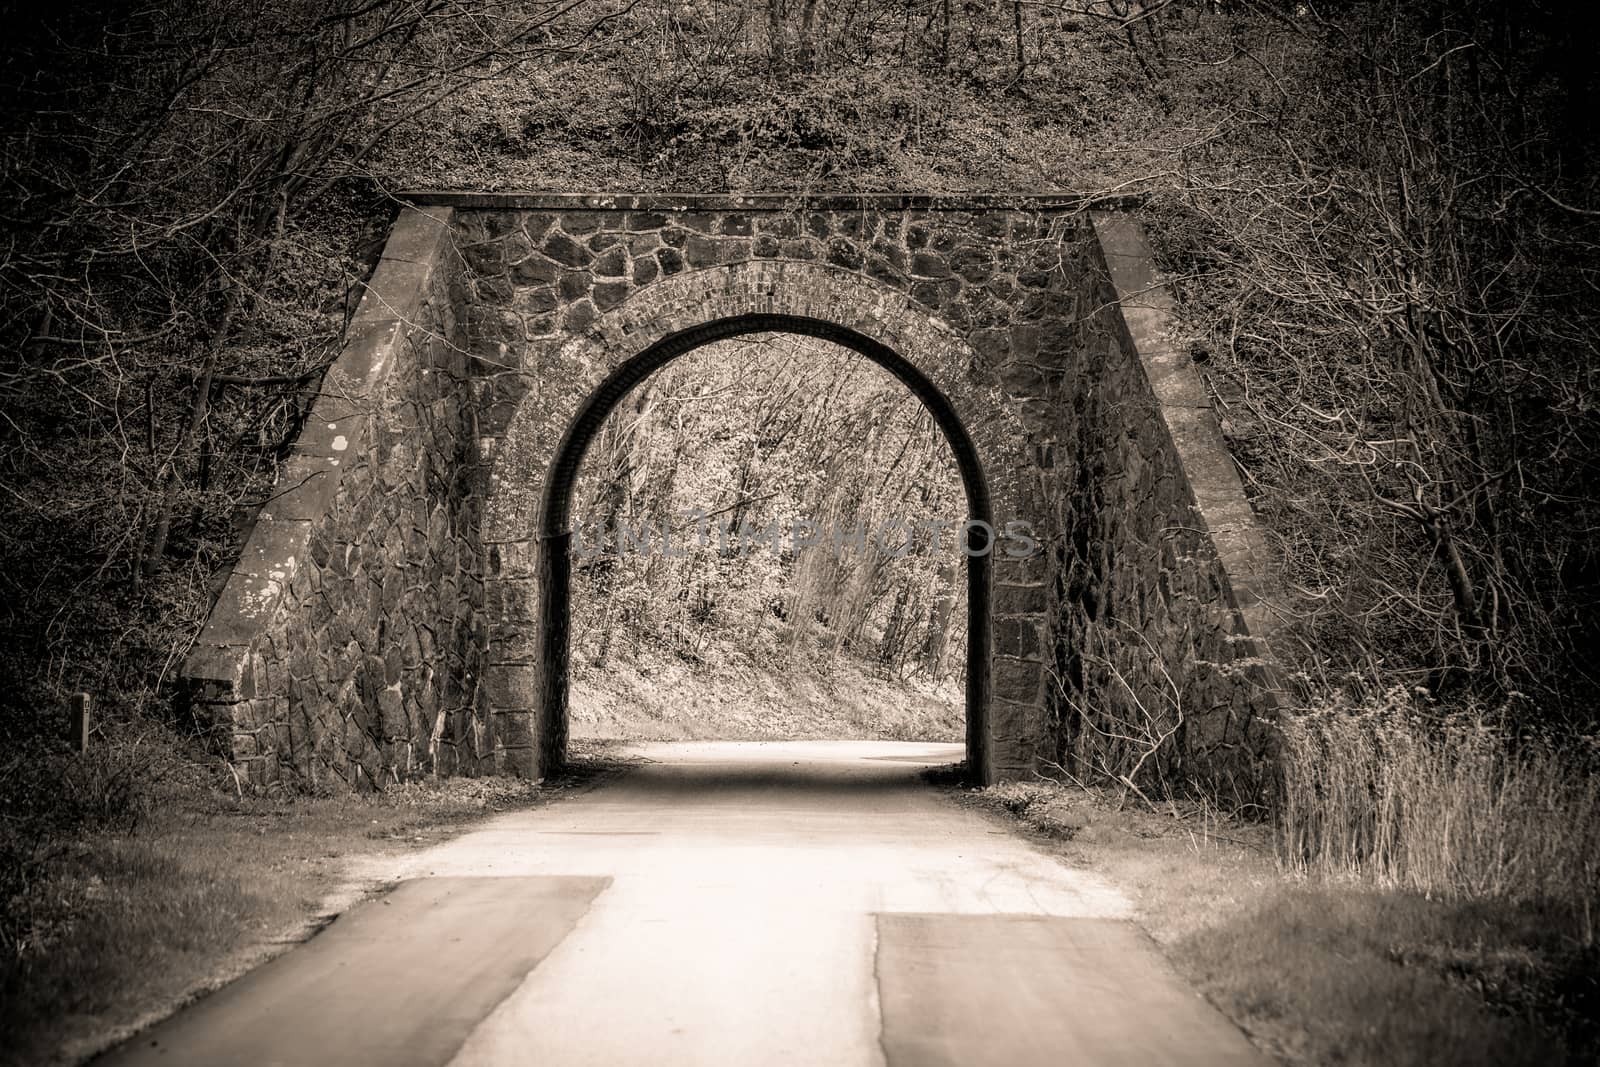 Road going through an old viaduct by Sportactive